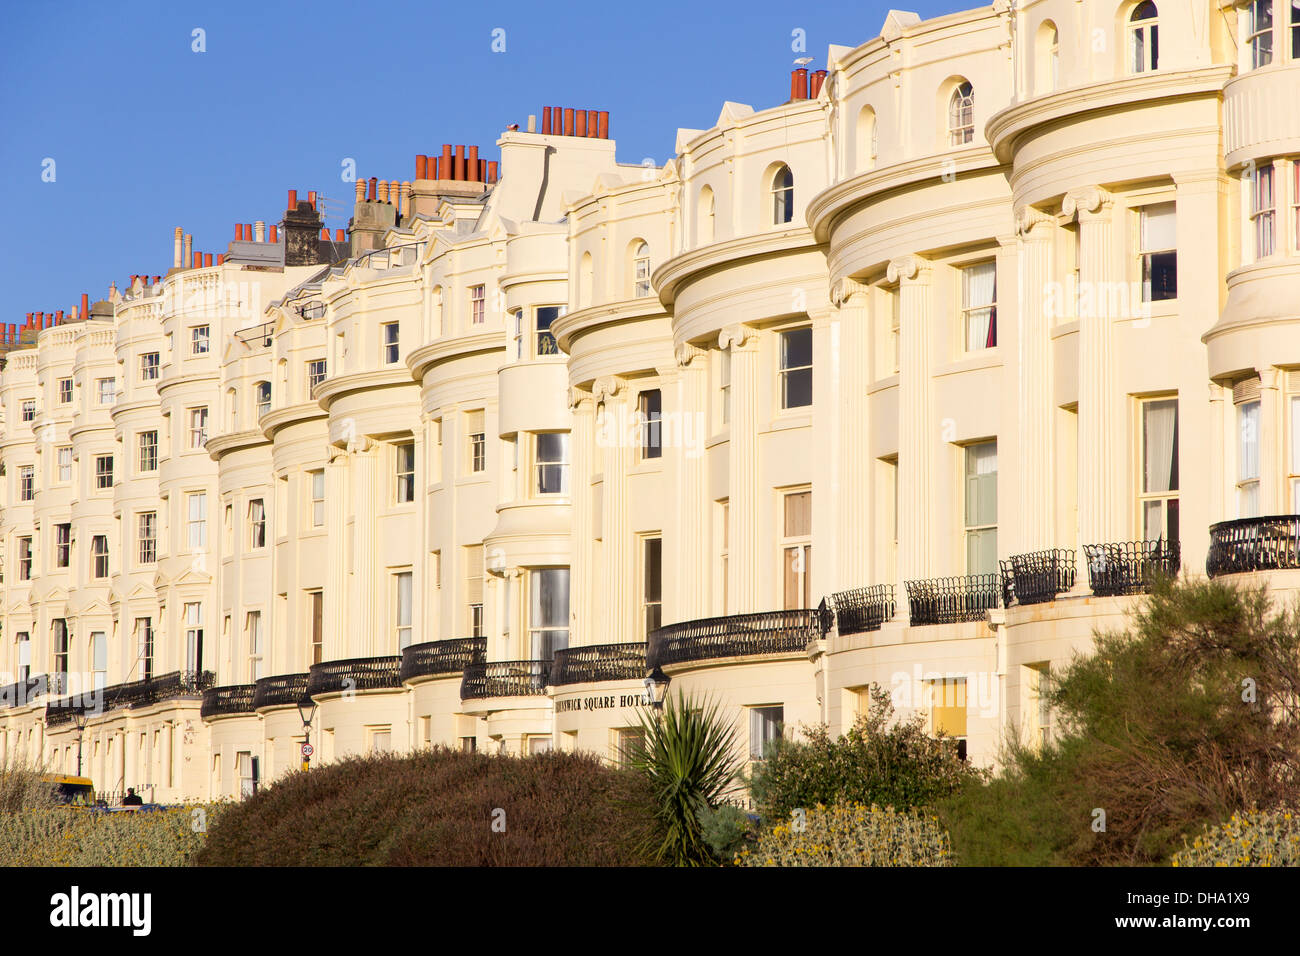 Hove, East Sussex, UK - 4 Nov 2013: the terraced mansions of Brunswick Square, Brighton & Hove Stock Photo